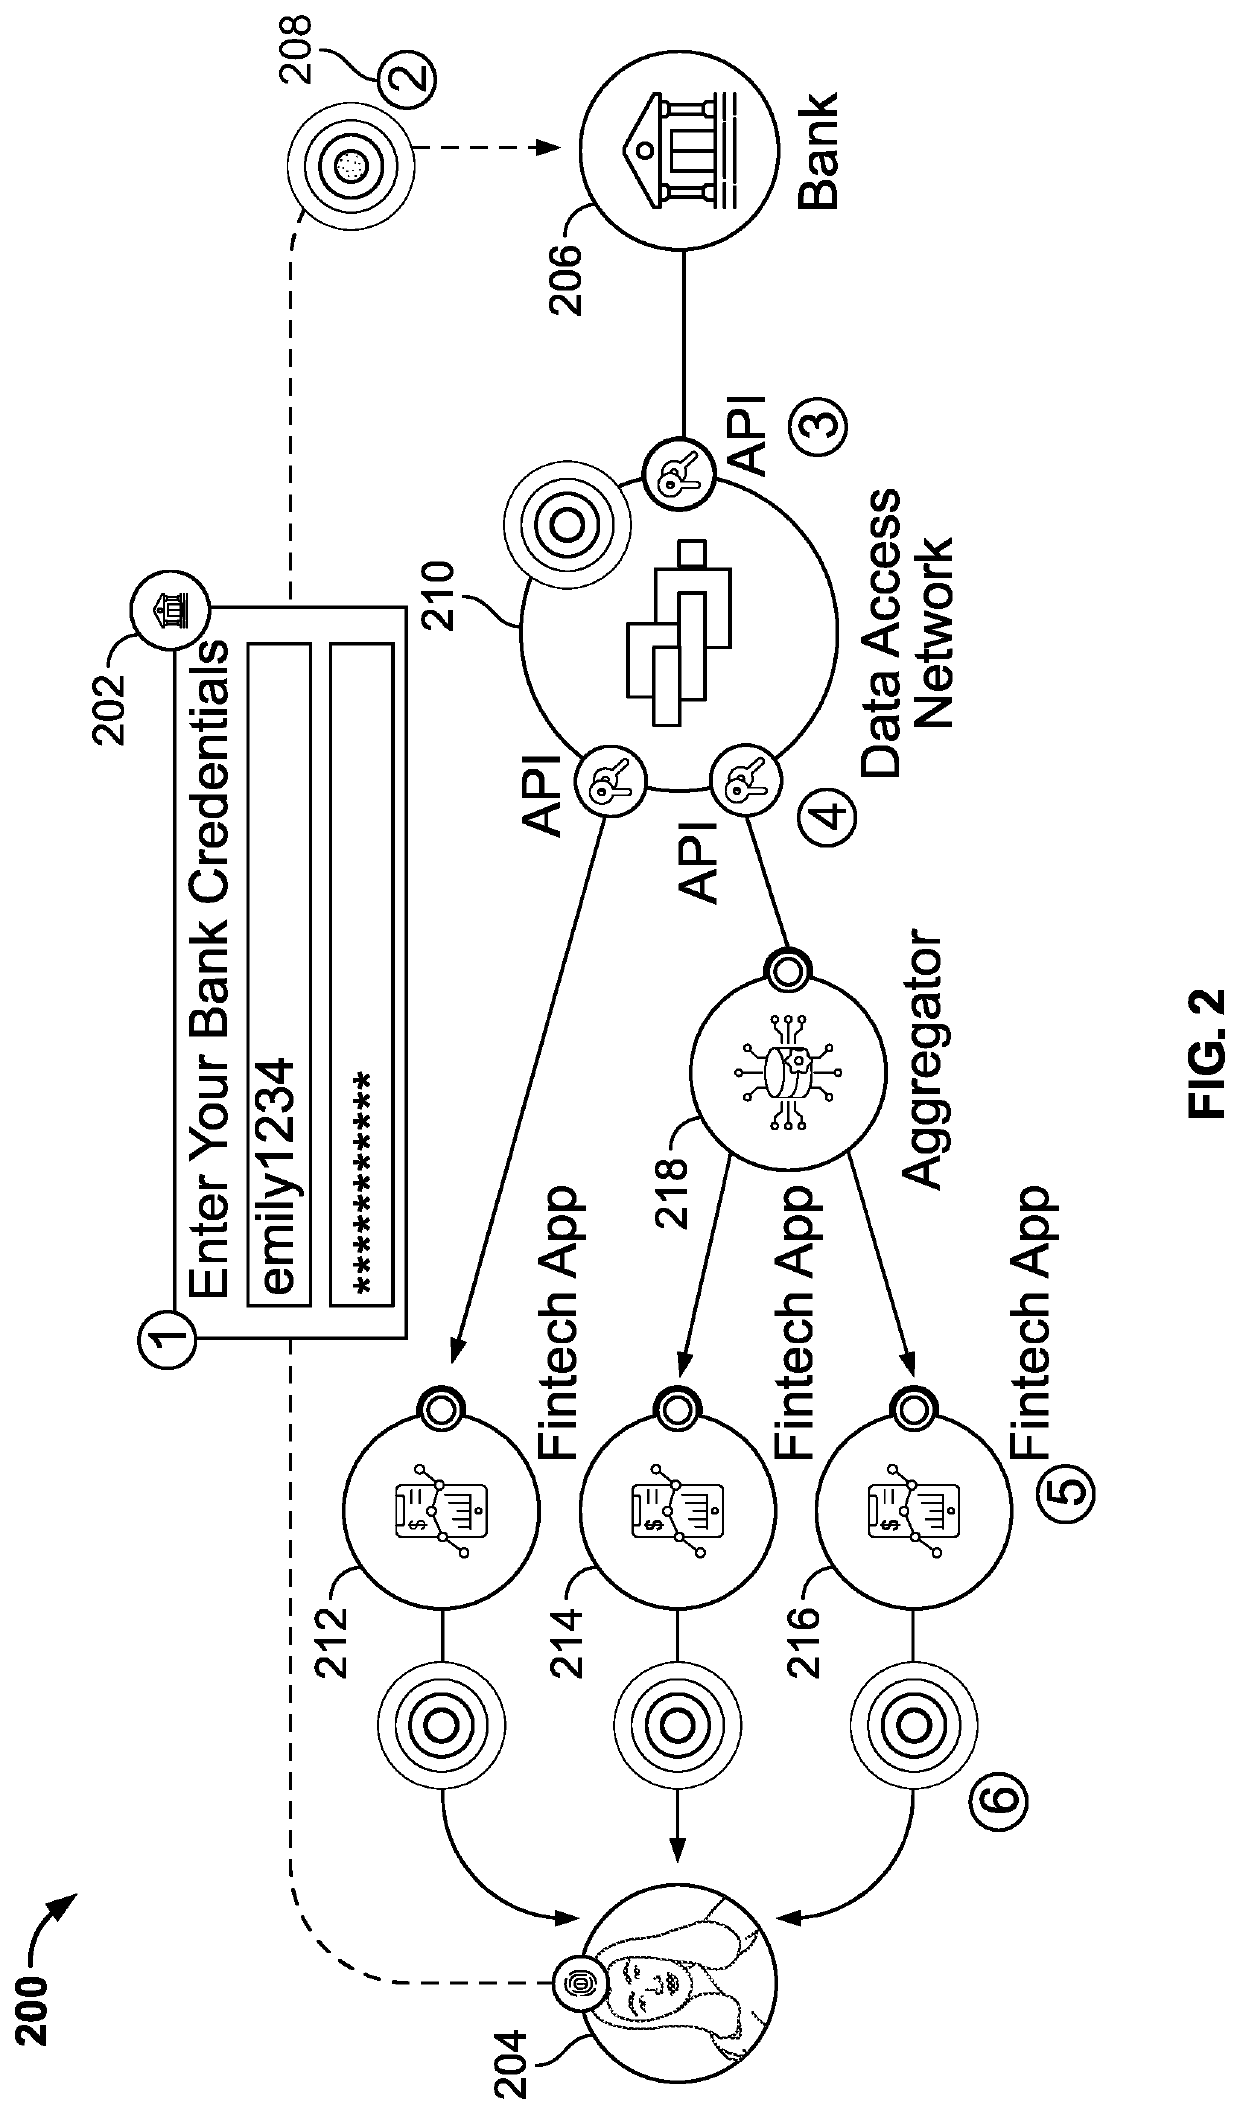 Systems and methods for managing tokens and filtering data to control data access